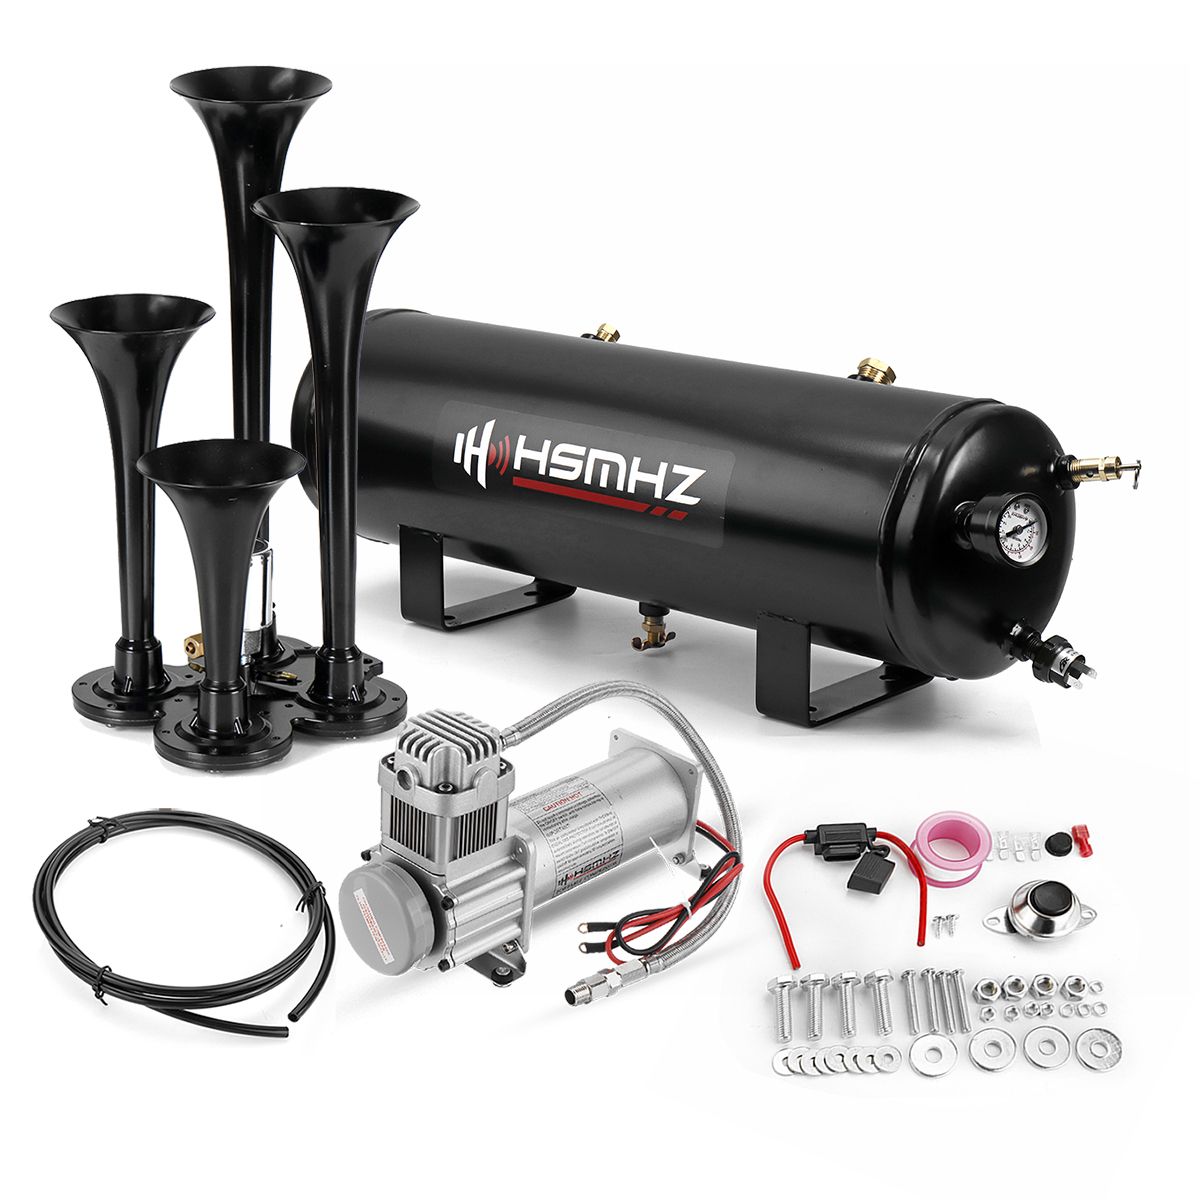 3-GAL-4-Trumpet-Air-Horn-Tank-200PSI-Compressor-Onboard-Kit-For-Train-Truck-Boat-1517321